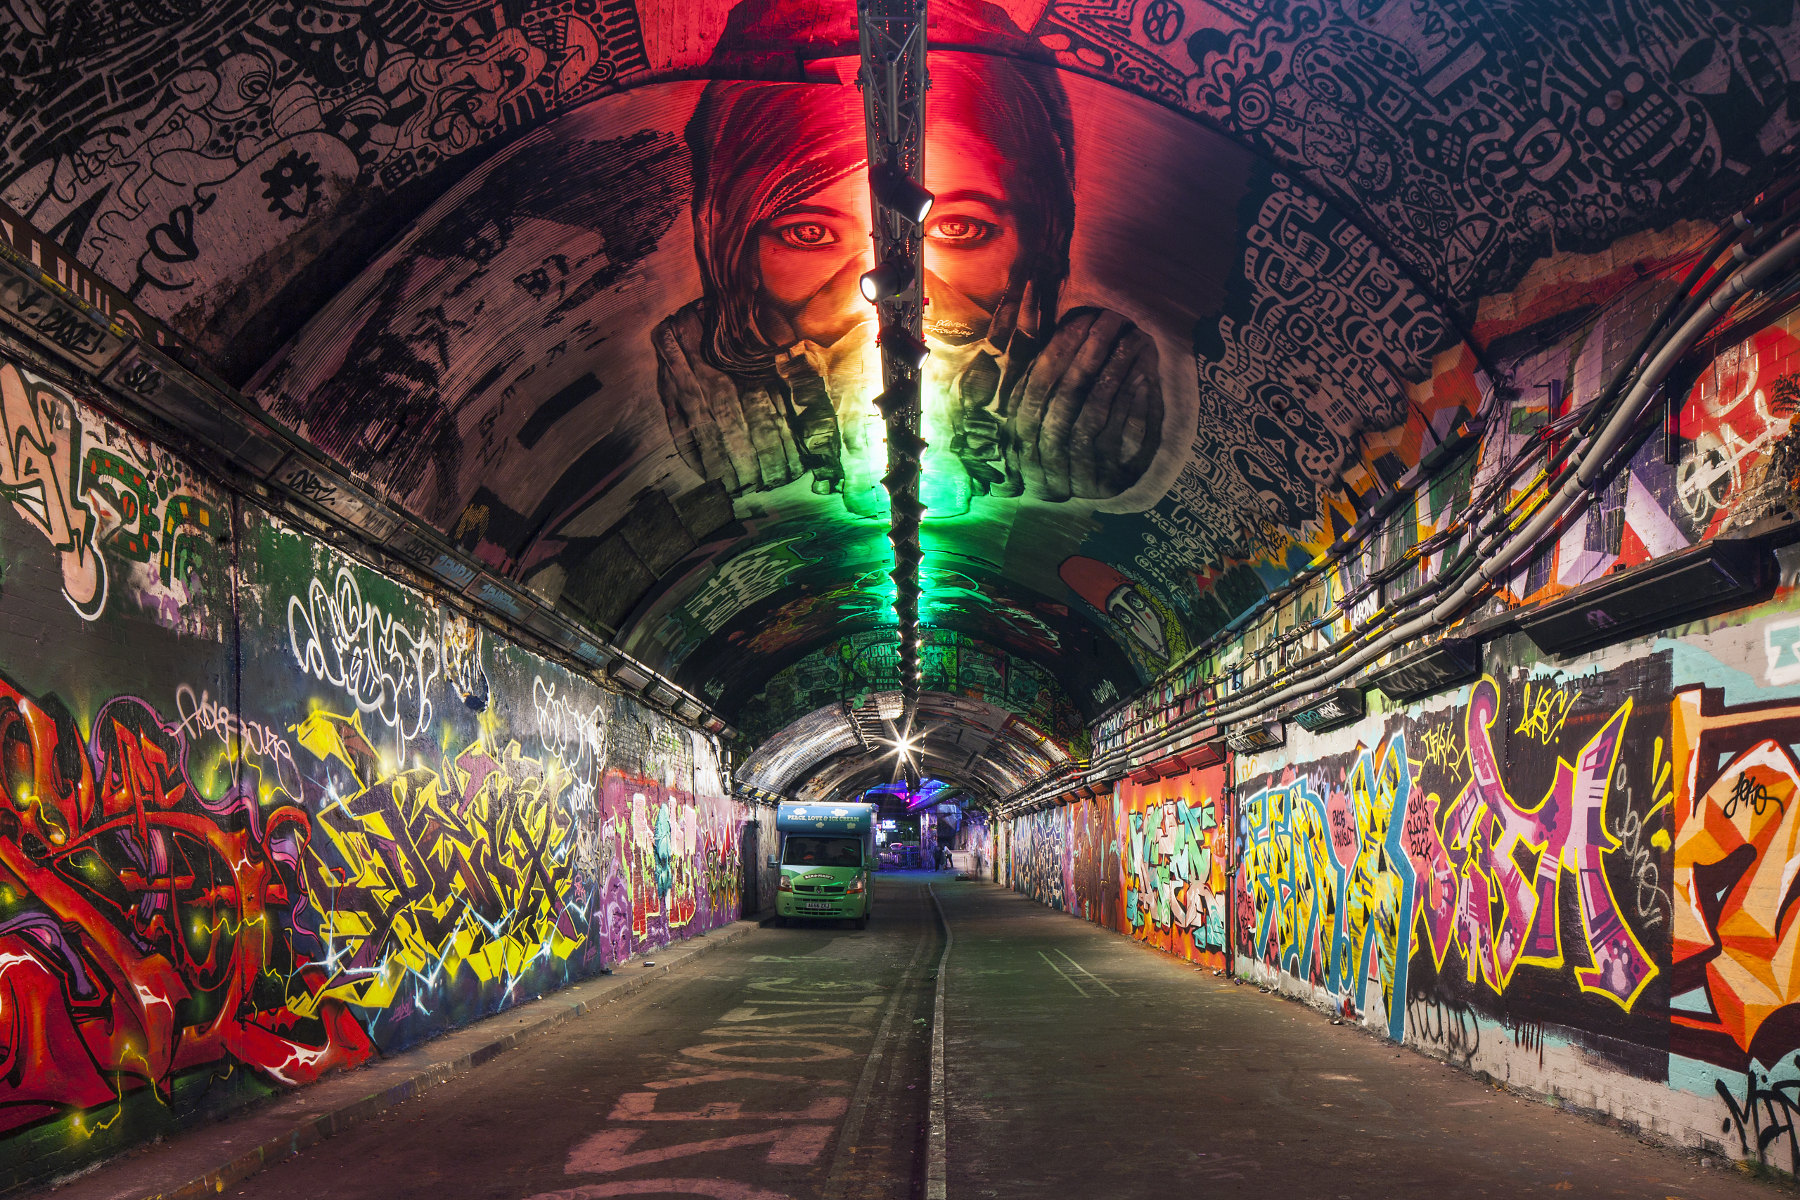 London's famous graffiti tunnel is the star of local regeneration